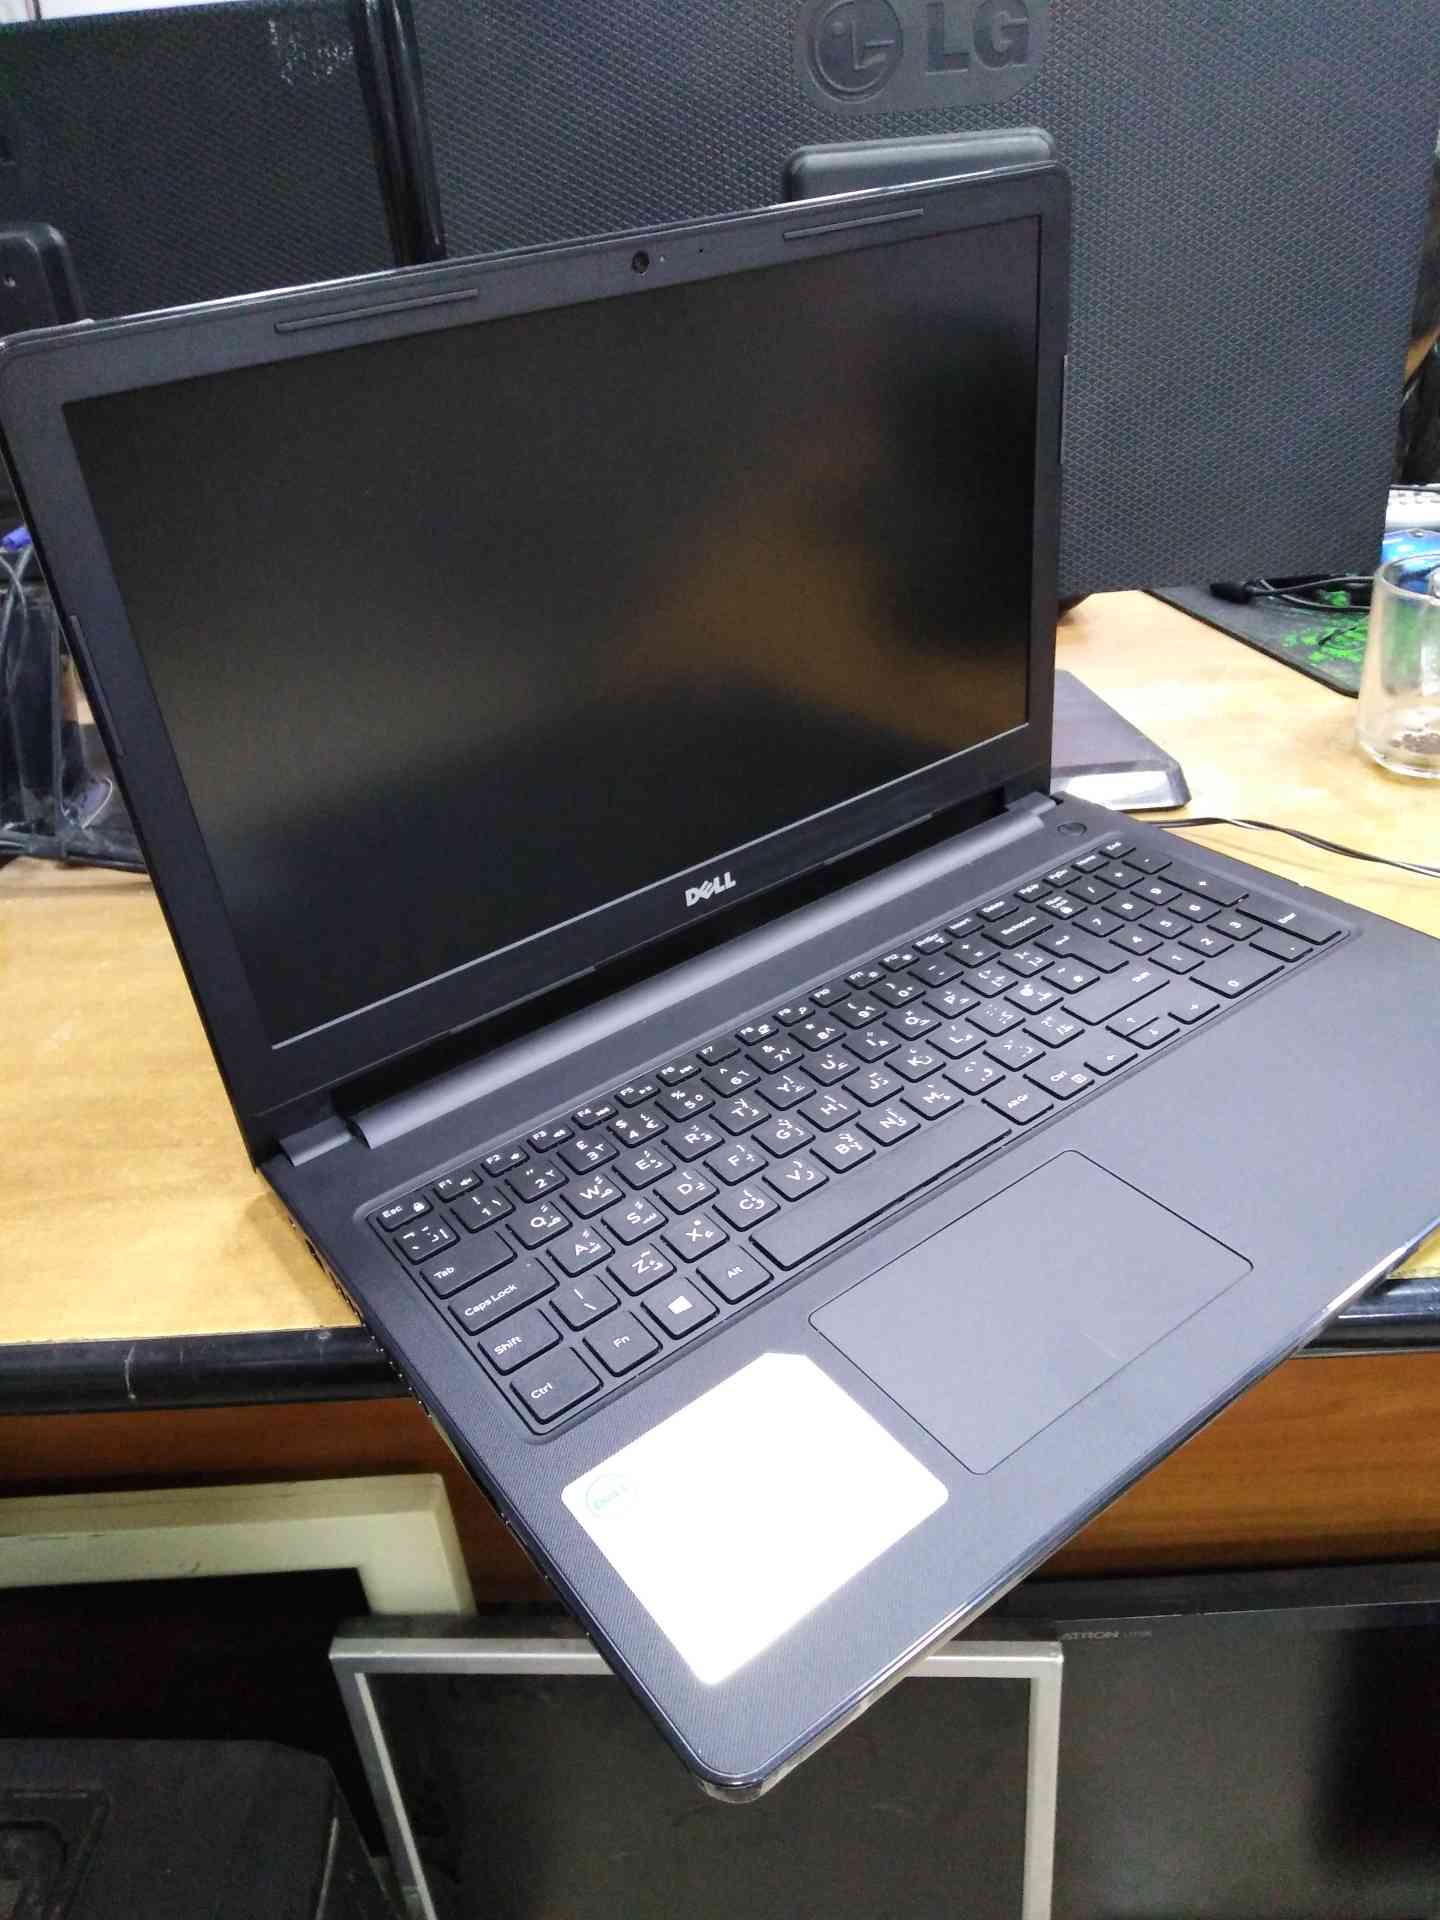 DELL ATG CORE i5 LAPTOP RARLEY USED IN GOOD WORKING CONDITION-  ديل i5 game laptop لا...